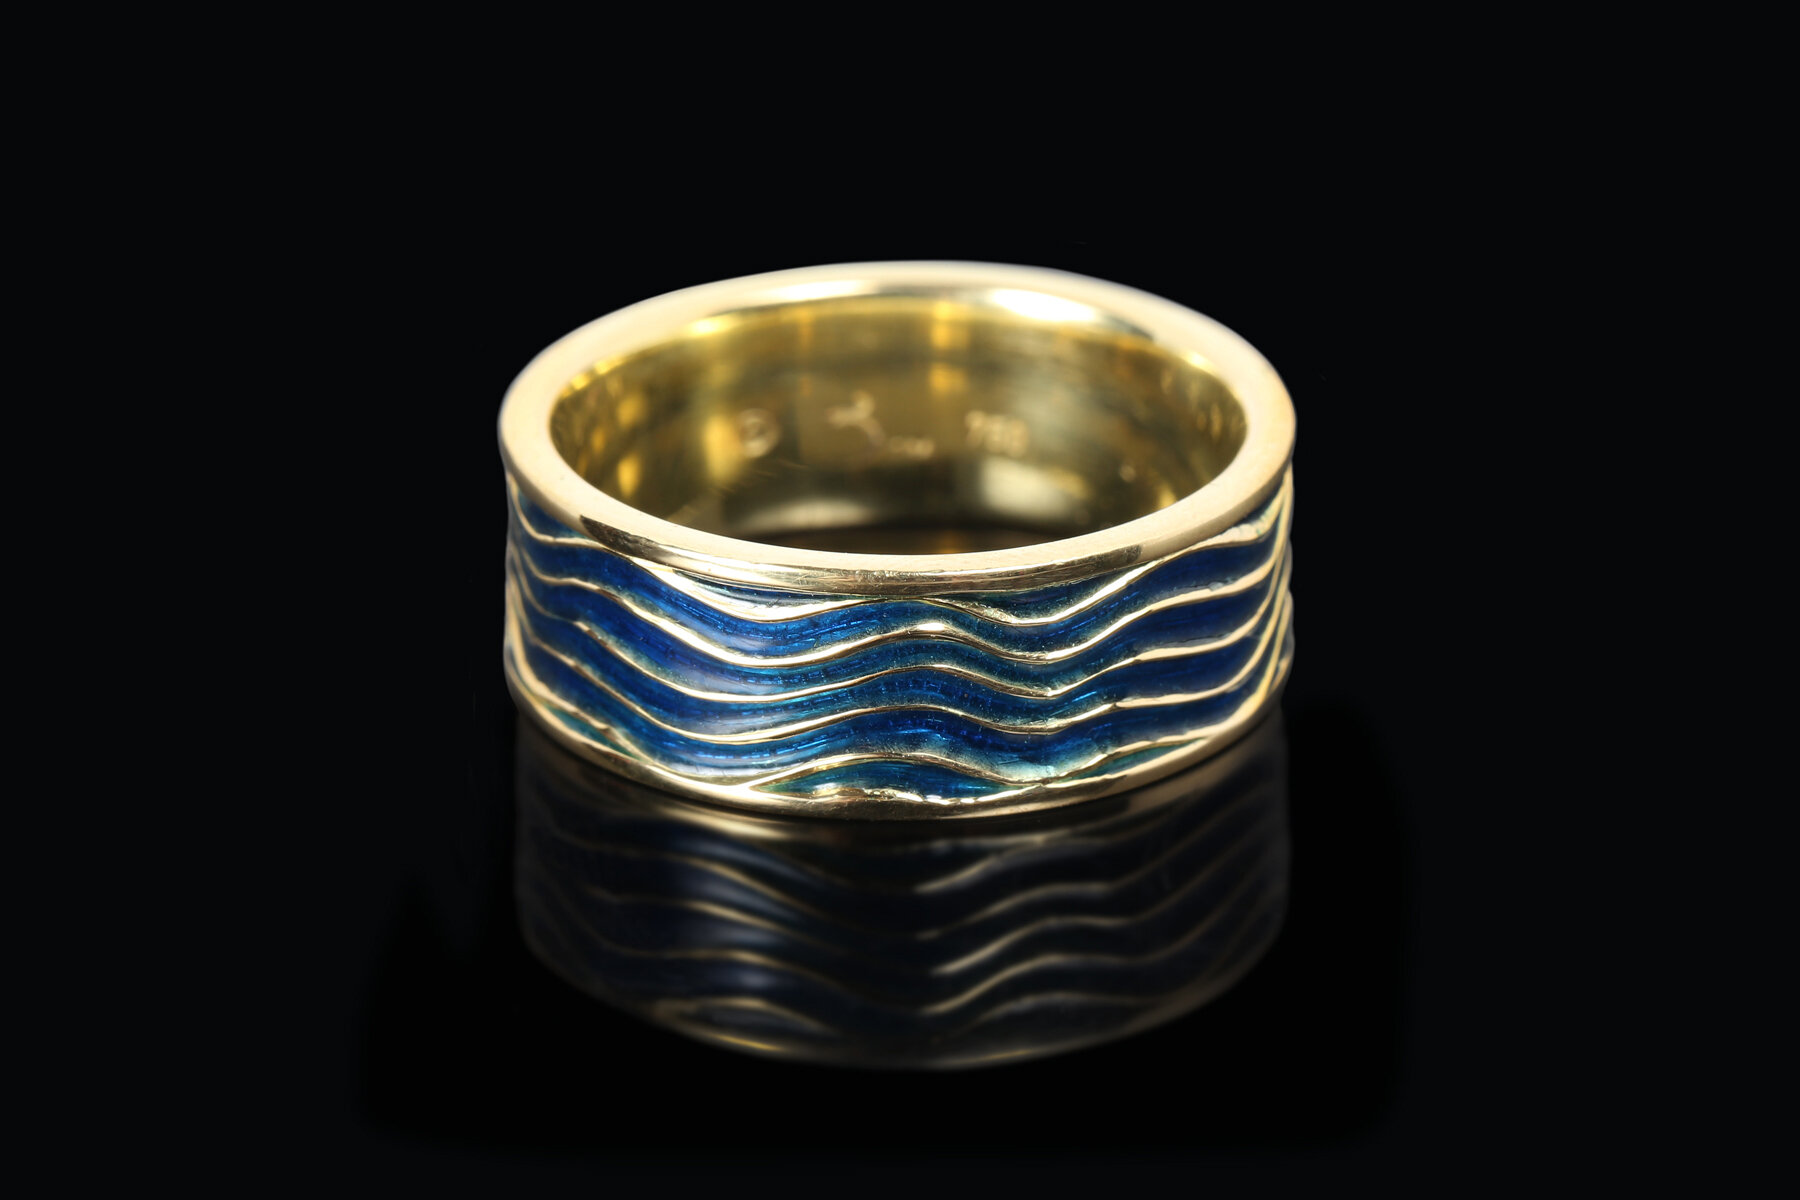   Royal blue enamel and 18ct New Zealand Gold   $2890.00 – Available tax free 